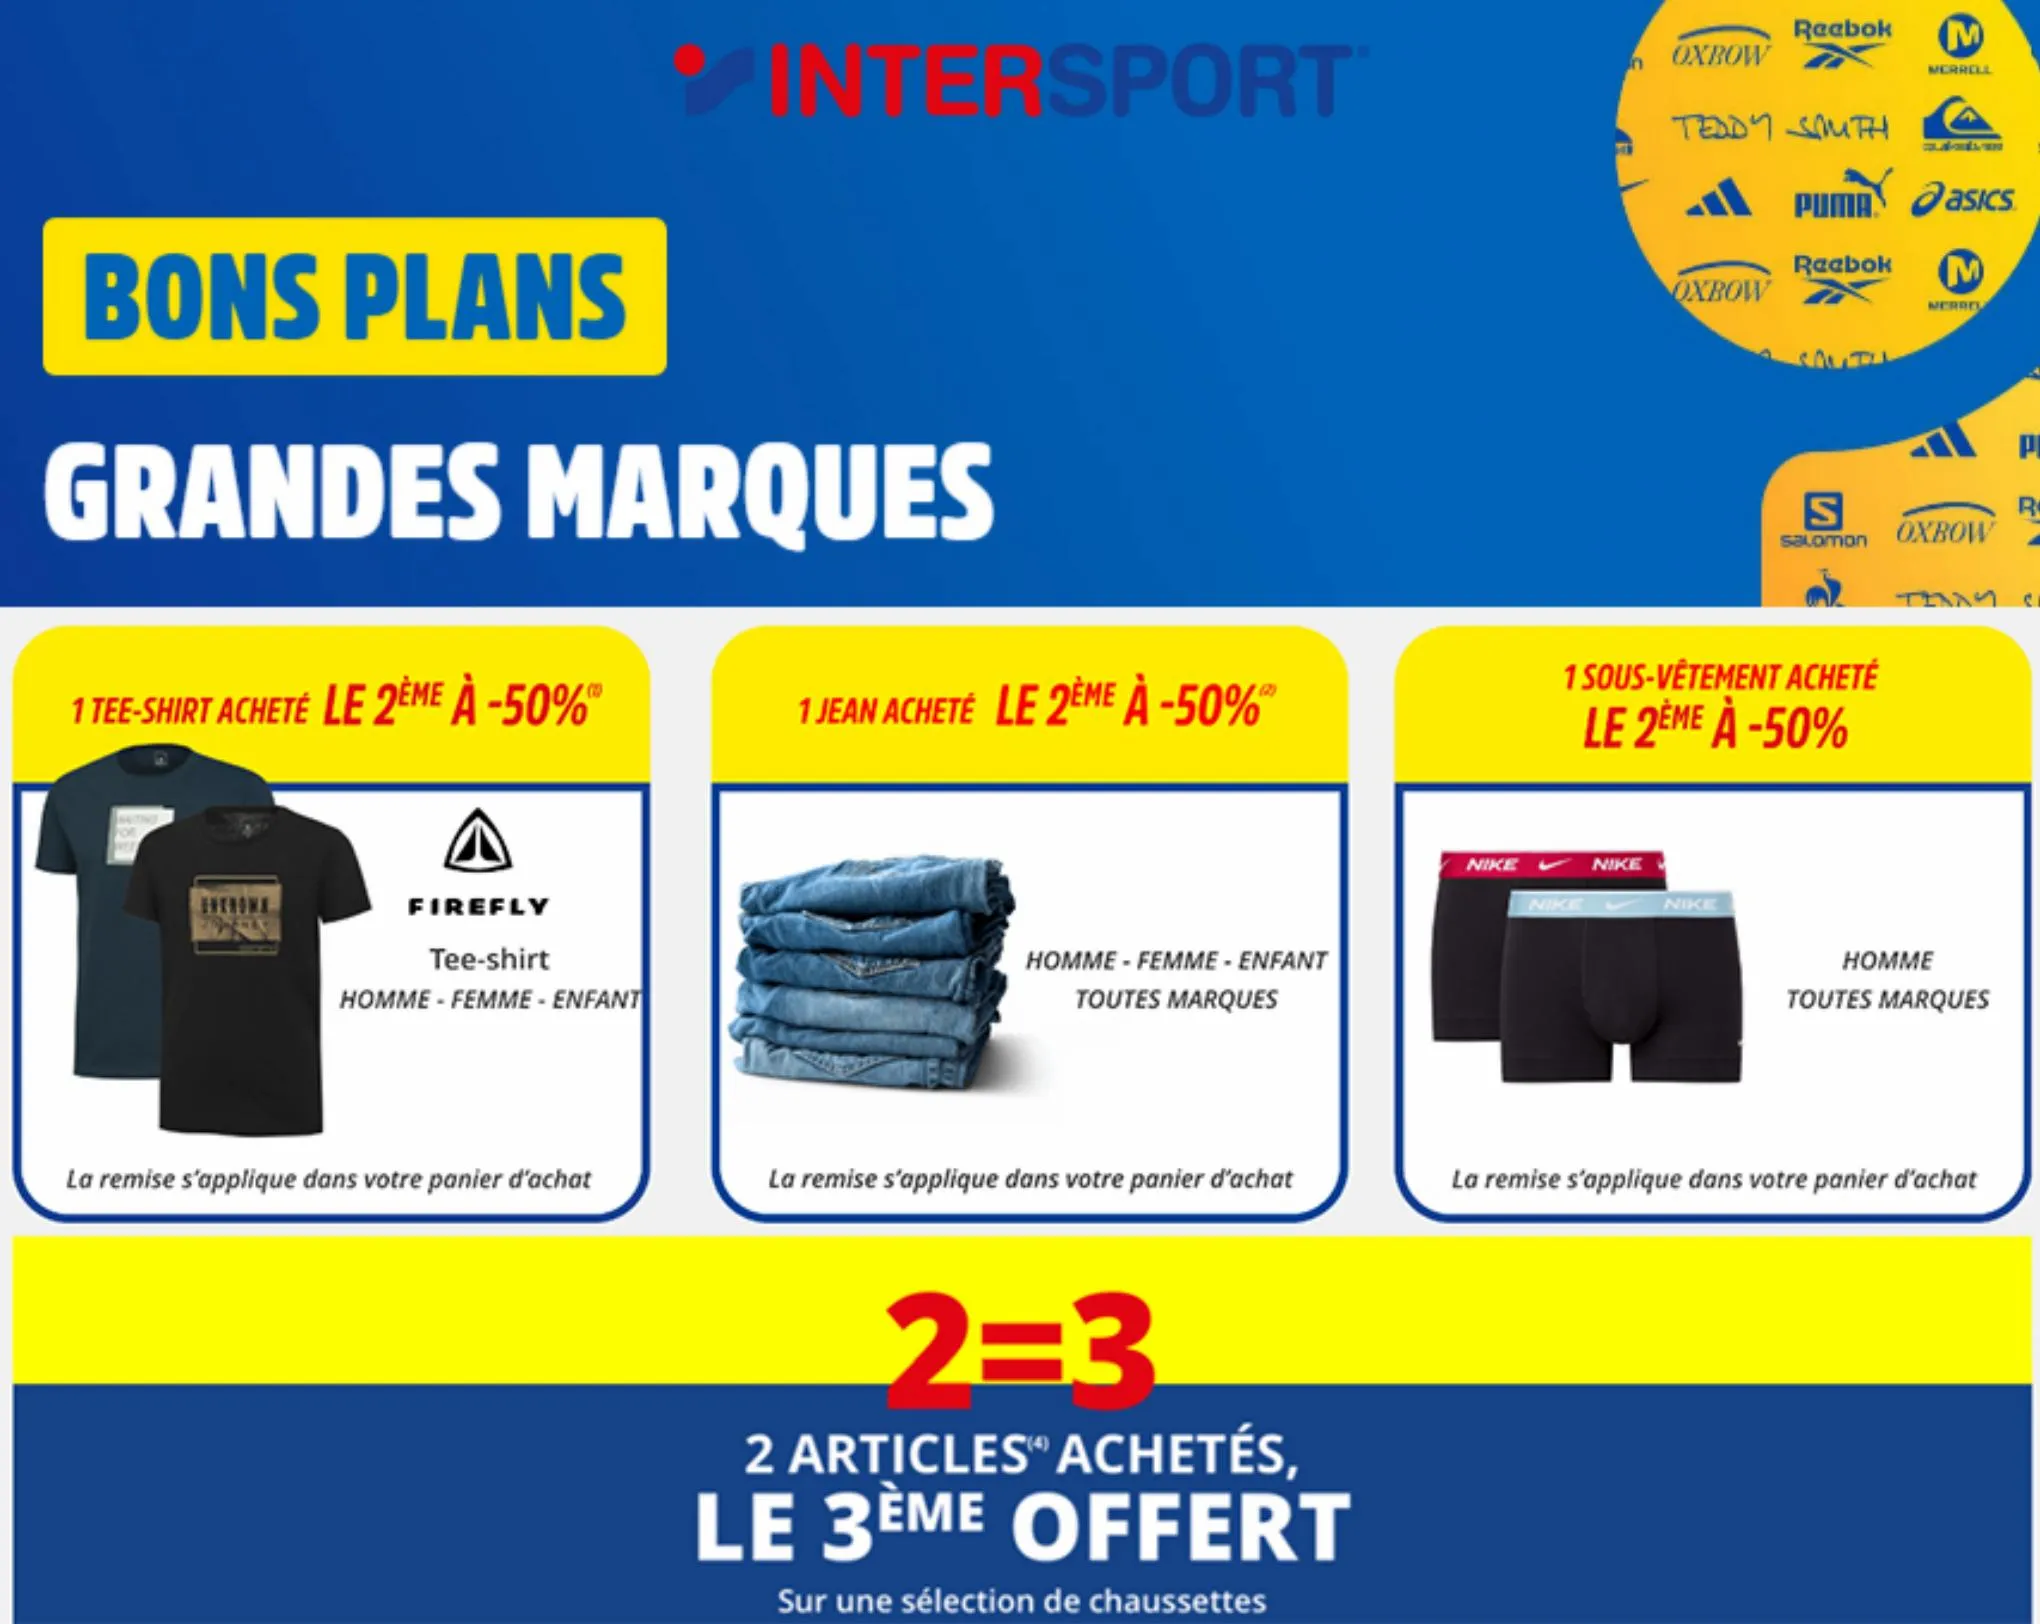 Catalogue Offres Speciales  Intersport, page 00001